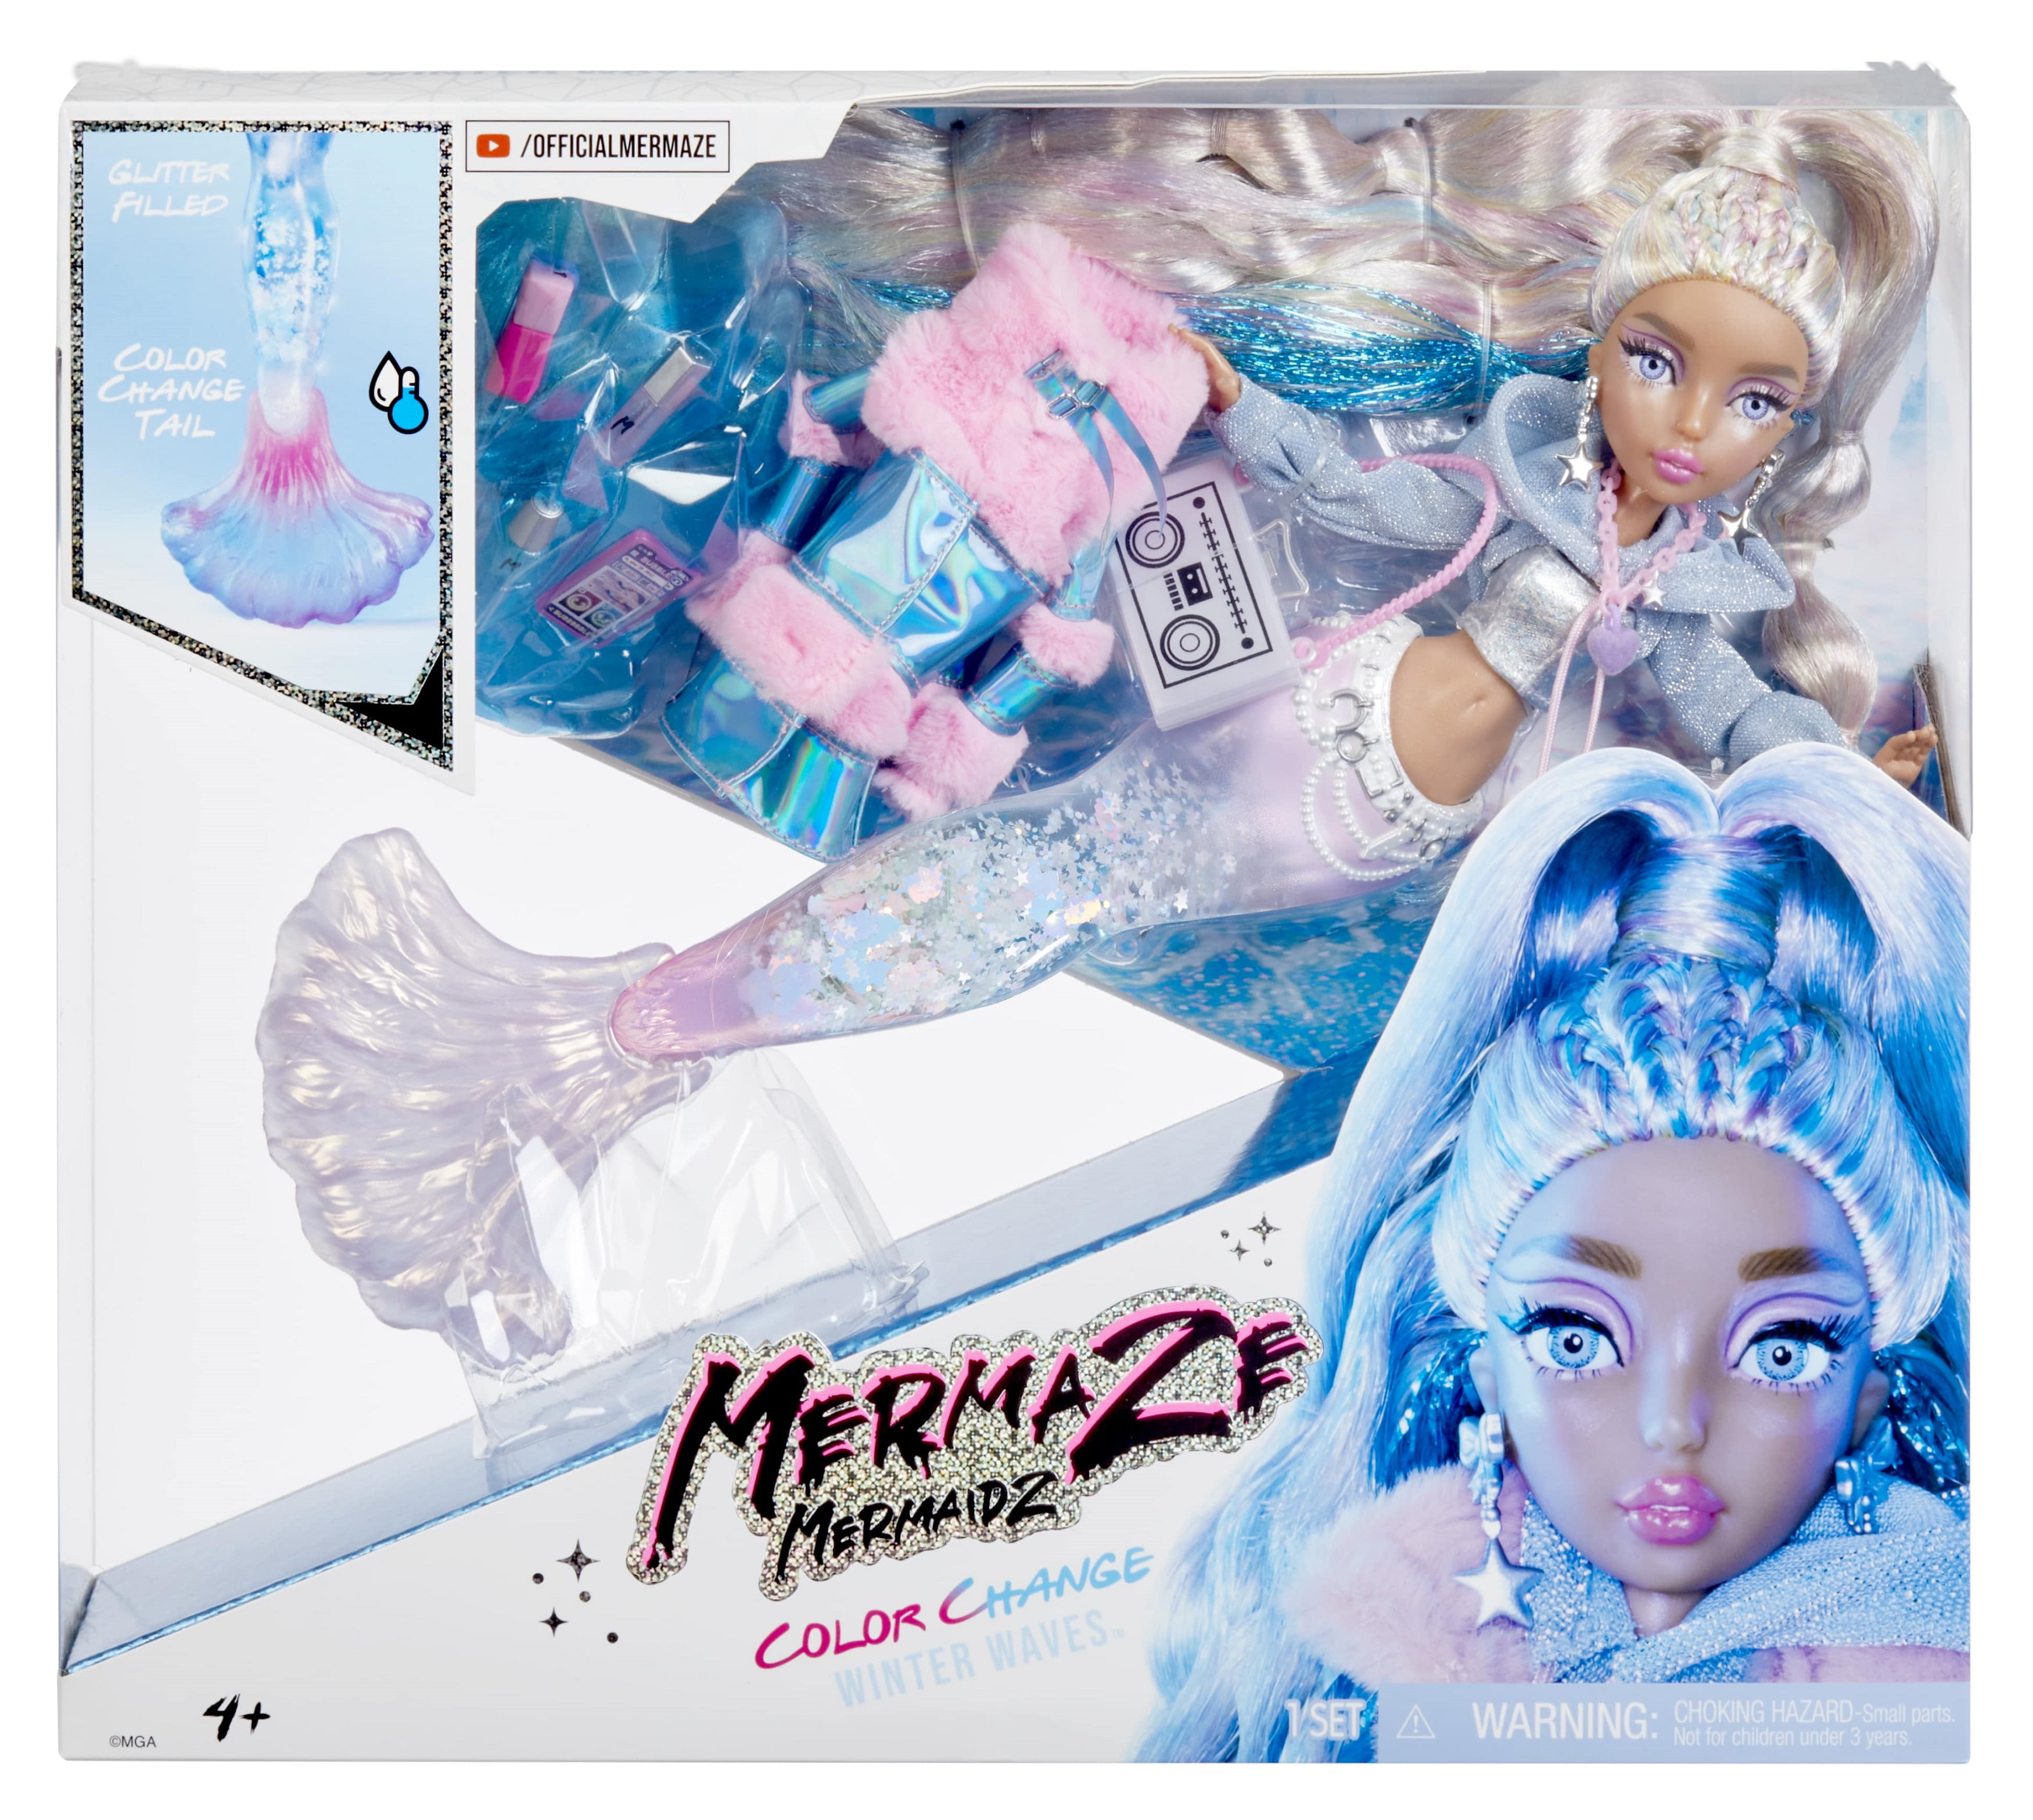 Mermaze Mermaidz™ Winter Waves Kishiko™ Mermaid Fashion Doll with Color Change Fin, Glitter-Filled Tail and Accessories